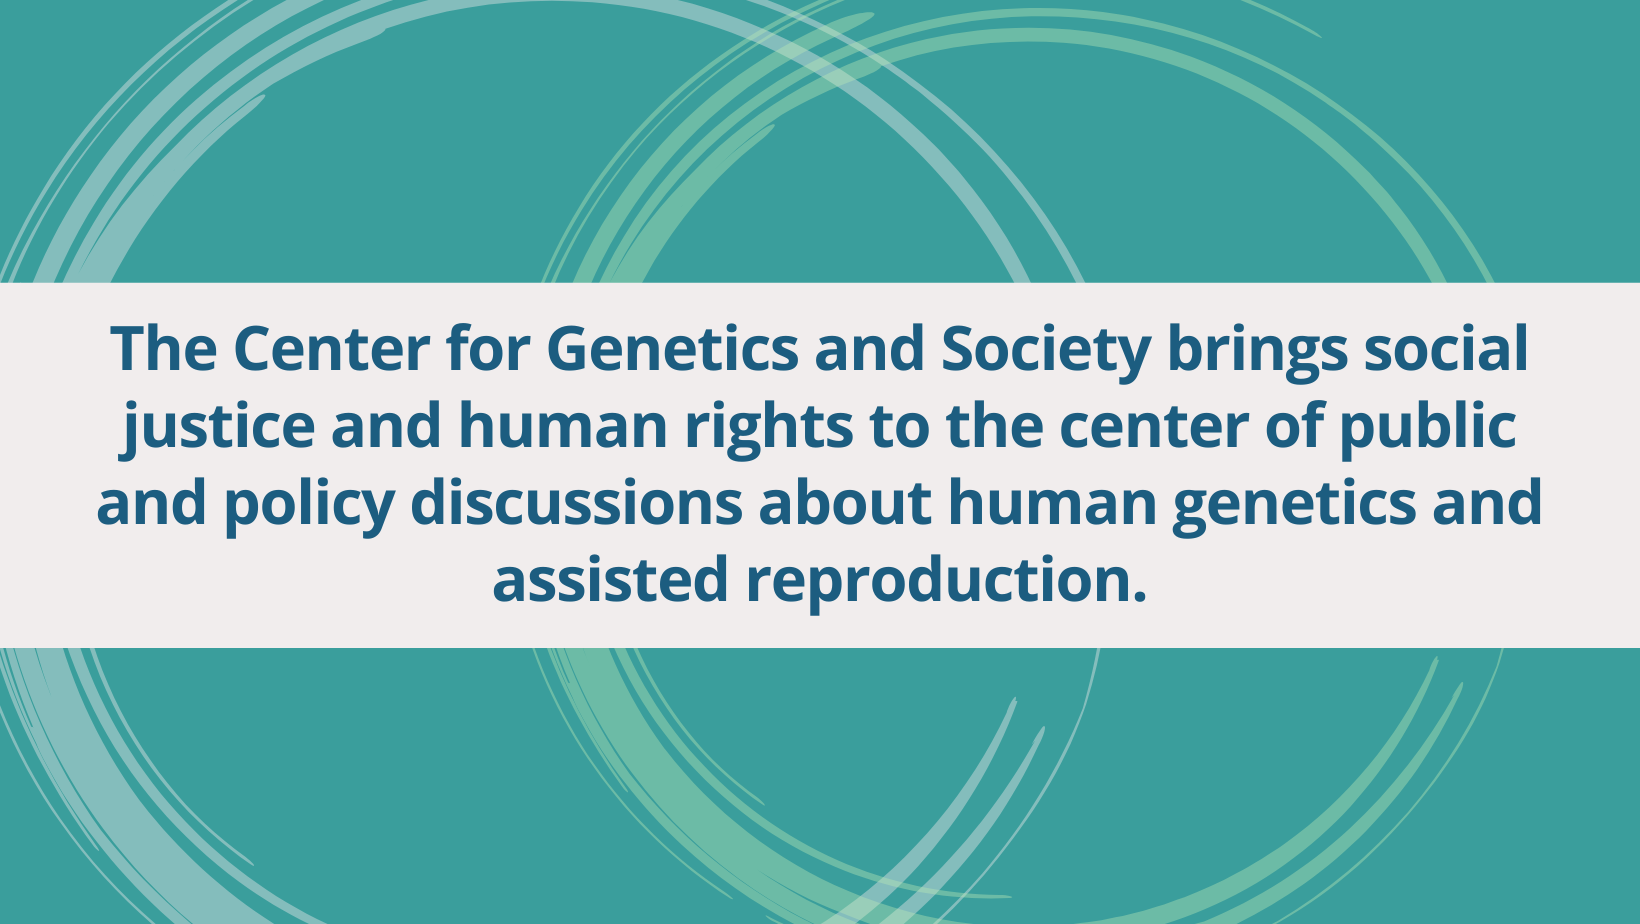 The Center for Genetics and Society brings social justice and human rights to the center of public and policy discussions about human genetics and assisted reproduction.